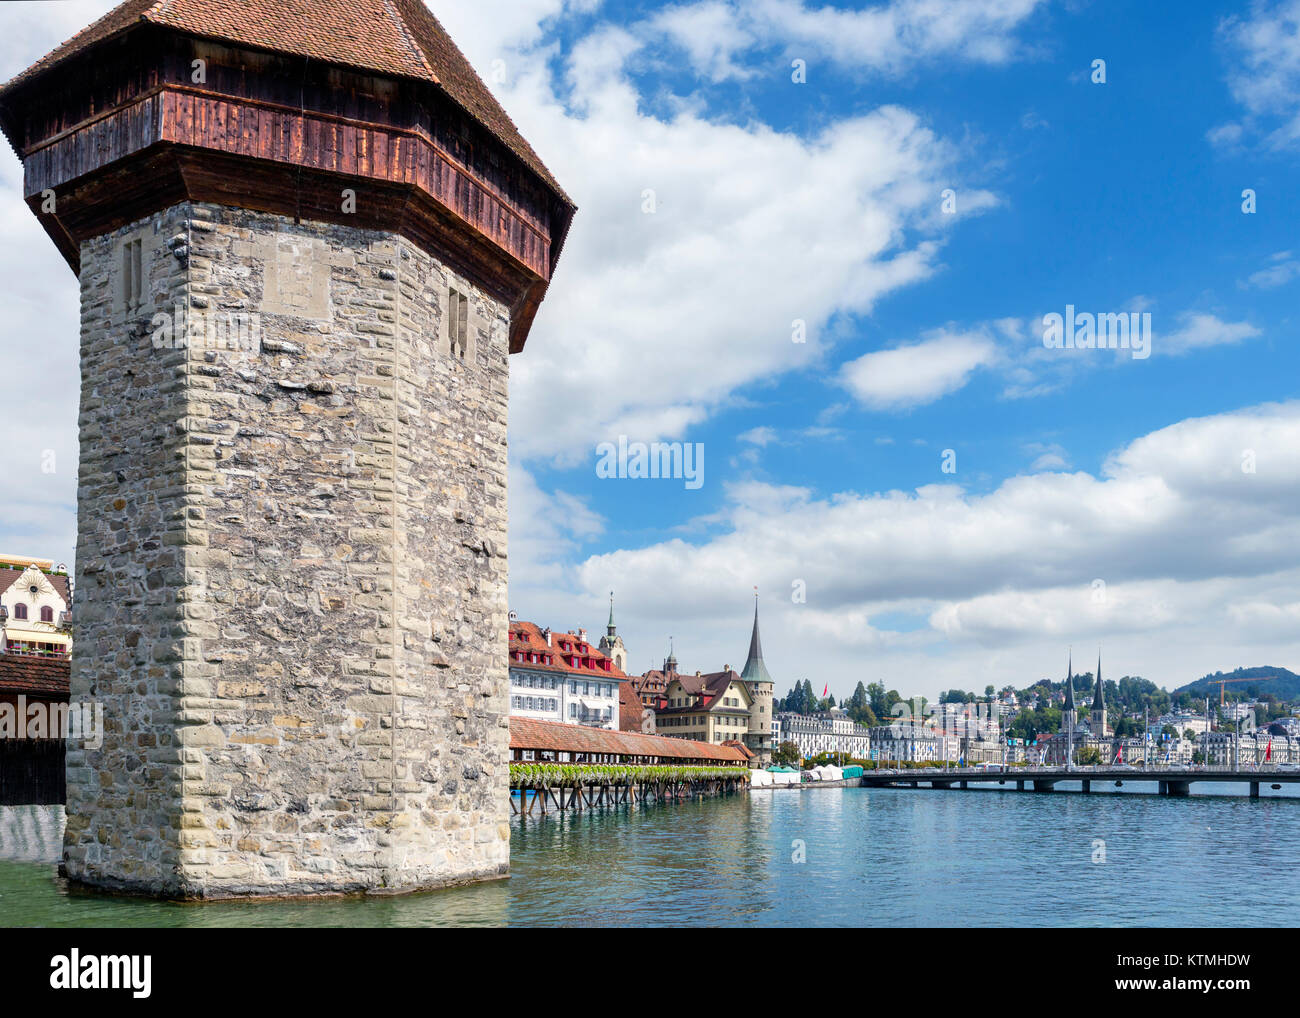 View of the KapellbrÃ¼cke and River Reuss, Lucerne (Luzern), Lake Lucerne, Switzerland Stock Photo